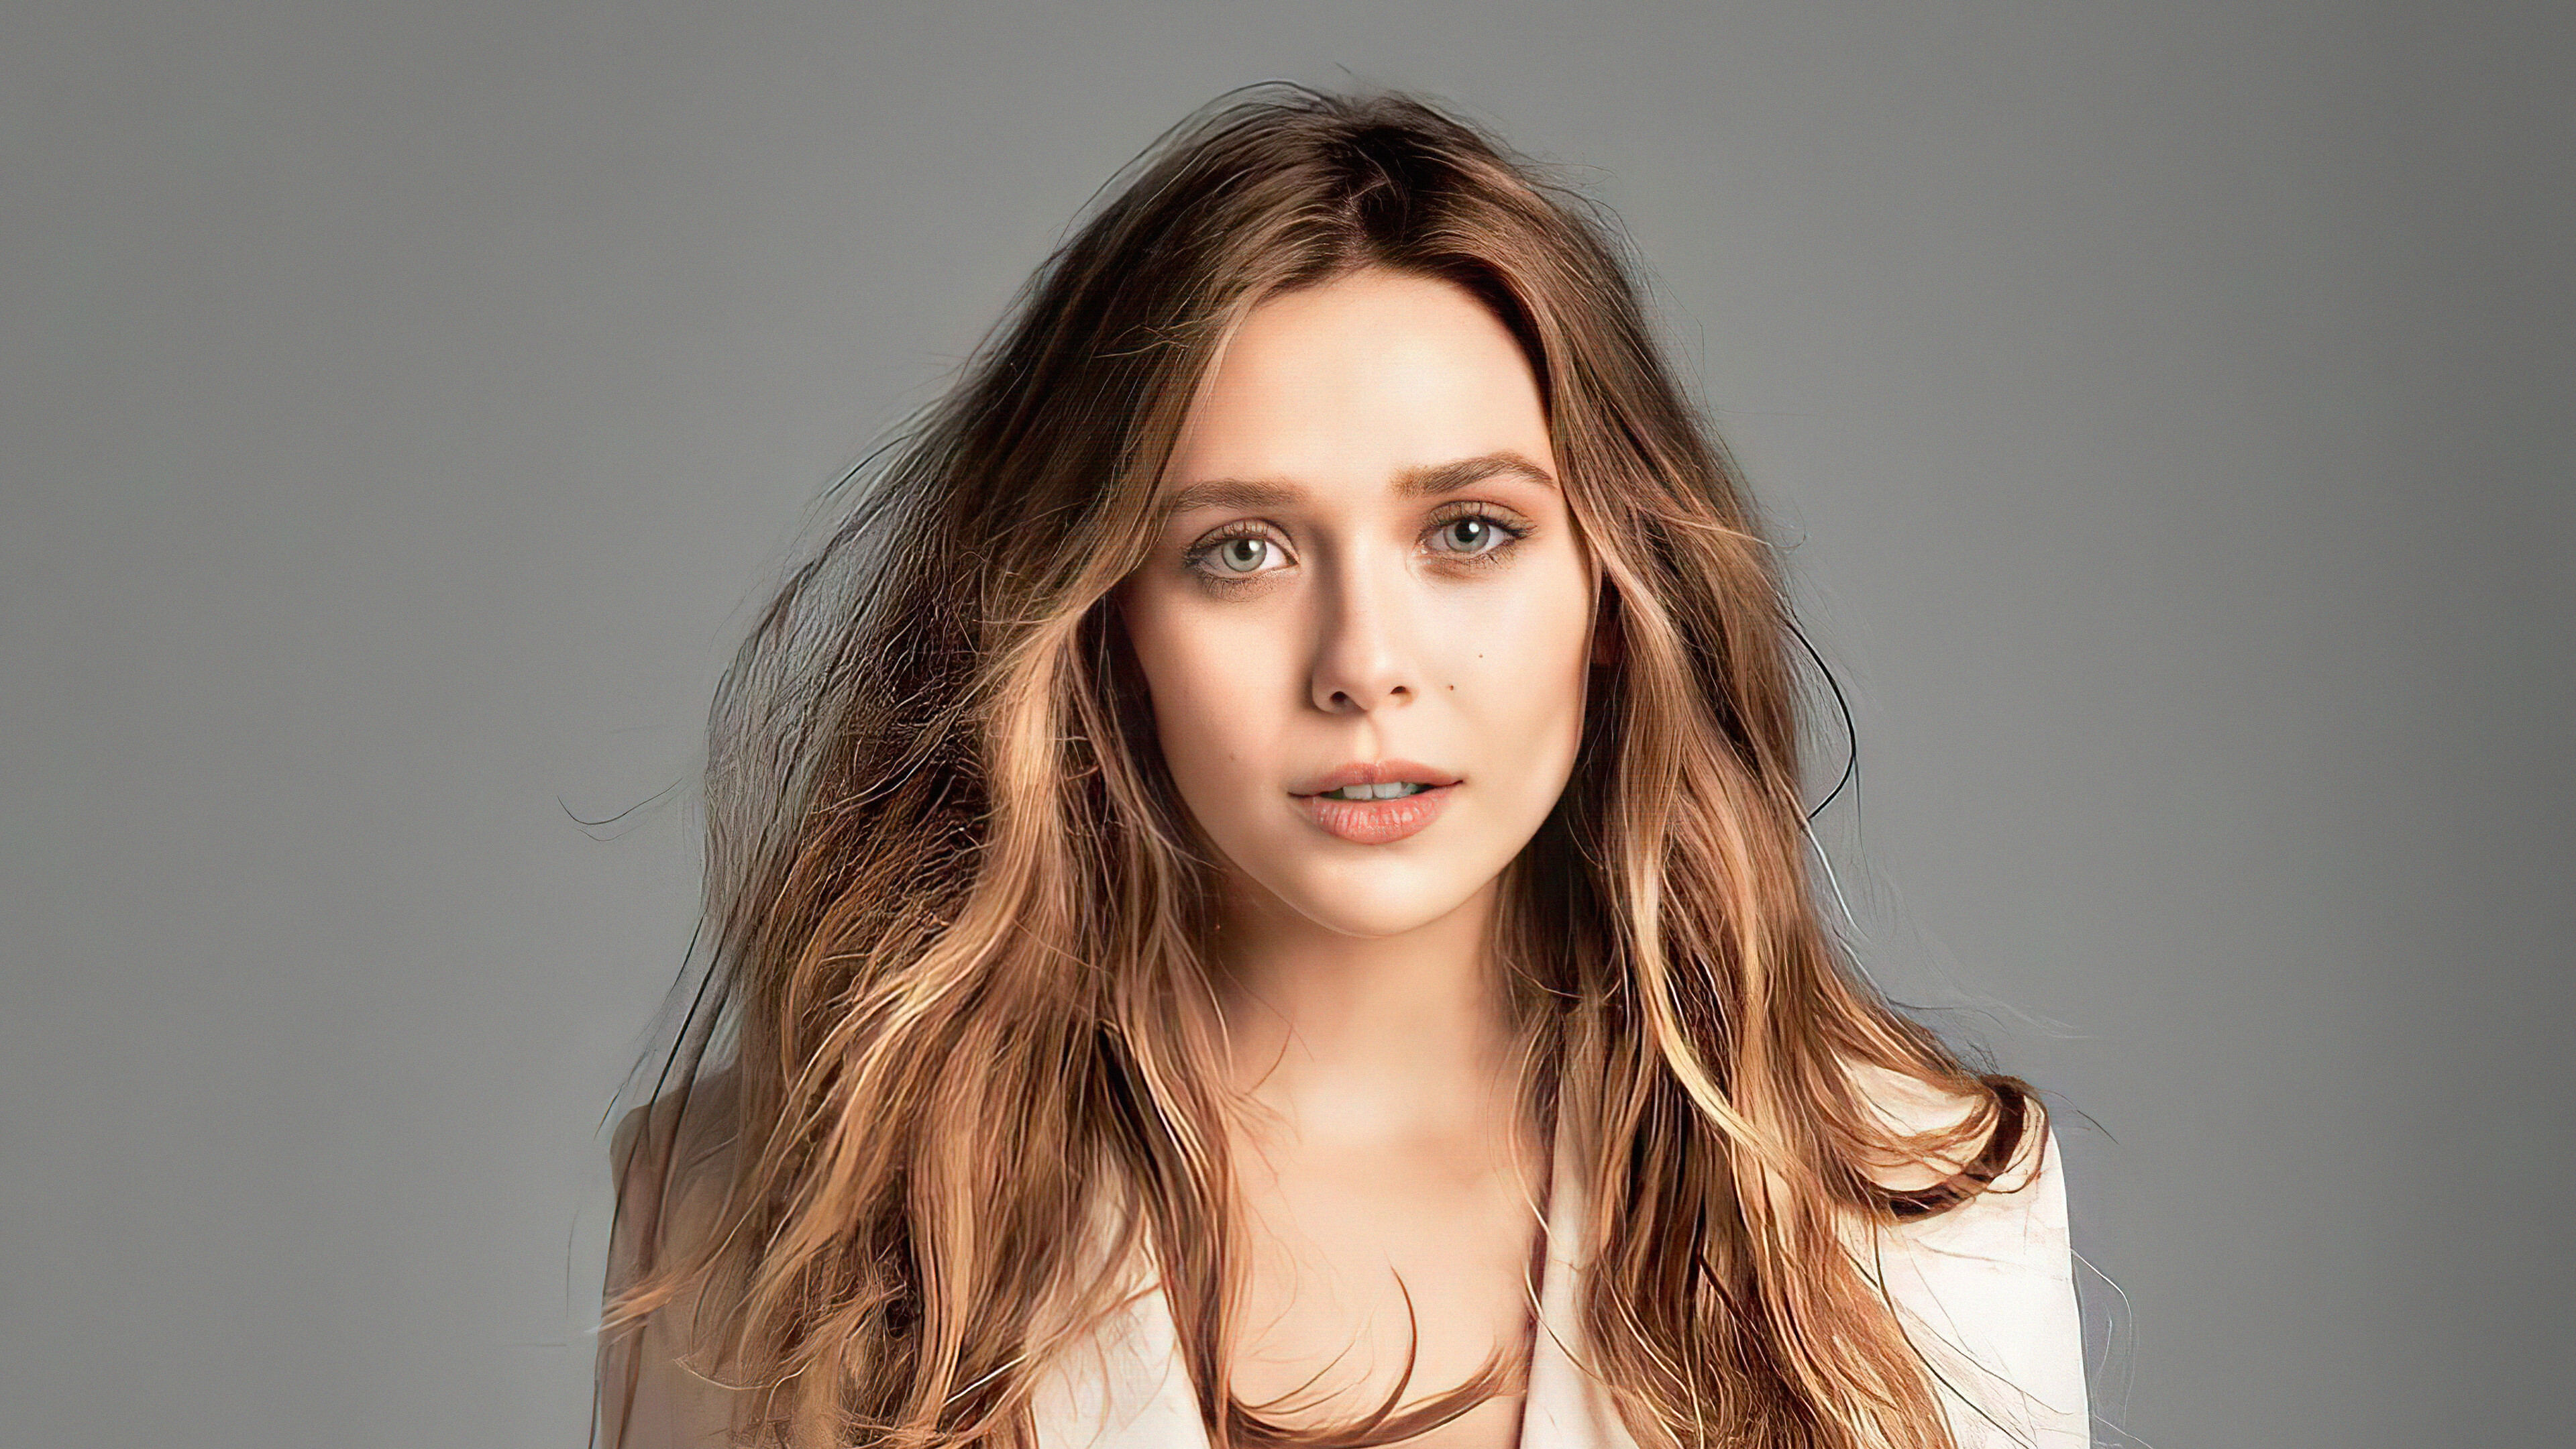 Elizabeth Olsen: Known for her roles in the films Silent House, 2011, Celebrities. 3840x2160 4K Background.